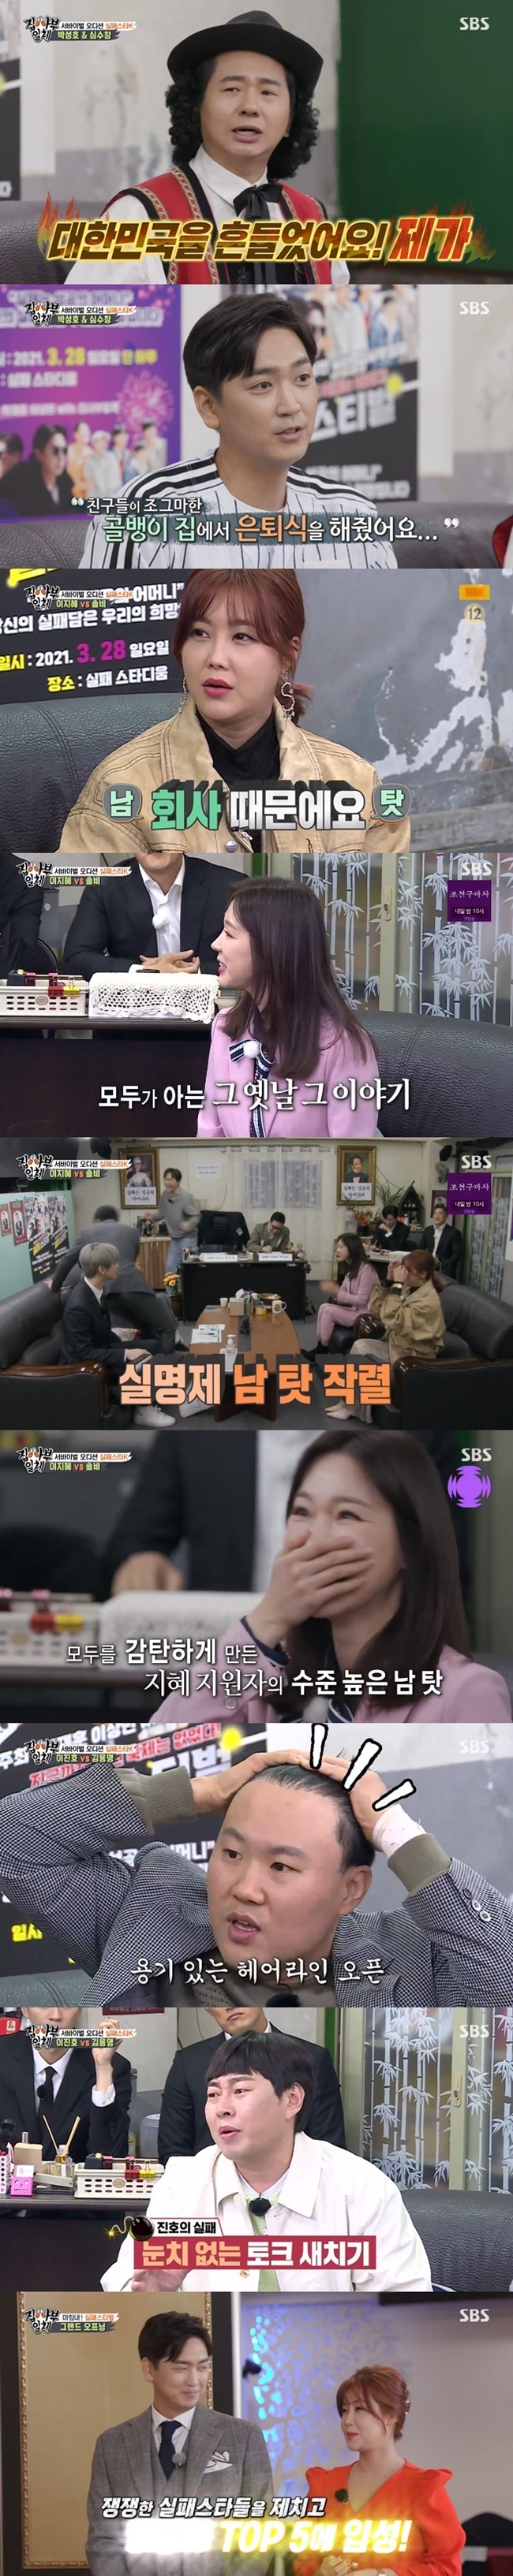 Various laughing Failurers came to All The Butlers.The final gateway to the Failure Festival began on SBS All The Butlers broadcast on March 21st.On this day, the members visited the Tak Jae-hun office for Survival Audition Failure Star K.Lee Sang-min surprised the members by saying, Failure stories have been received for about 6,000.The common point of the story was anonymous, said Tak Jae-hun. As the Failure Festival is the prime time of SBS weekend, we will thoroughly screen people who want to go to other pros on this basis.The first applicants were Shim Soo-chang and Broadcaster Park Sung-ho, who were baseball players.Park Sung-ho confessed that he had dreamed of entering the overseas market as a yodler after the abolition of KBS 2TV Gag Concert, but was suffering from Corona 19.Im not retired, Im stripped of my clothes, Im released, said Shim Soo-chang, and my health was also Failure. I heard fans say why Im so healthy.Im not going to be in Group 1 if I have to be a little less healthy...The second applicant was singer Lee Ji-hye and singer and writer Solbi.Lee Ji-hye cited the dismantling of the group shop as his Failure case and said, It was because of the Seo Ji-young, which shocked everyone.Lee Ji-hye said, Its funny. He said he was close to Seo Ji-young. He also said, I made about 12 albums.I was invited to the Paris Art Festival because I was very insulted by the performance stage, but it was a good opportunity for art. The members then got a phone connection with the storyteller Debtly (a pseudonym) with the advice of Lee Ji-hye and Solbi, Failures case of phone fraud.Ive been living an unknown Actor for about seven years, said Debtly.I fell out of the document screening about 1,500 times, and I was exercising to make a special skill, and the cruciate ligament was completely ruptured and 100 million frauds were caused by charter fraud. In addition, Debtly was instantly acclaimed for his performance; the members asked for his real name, but Debtly refused, I want to be recognized for my success later.Solbi said, People say to me, Why do you do art? Why do you keep going on an opaque and lonely path? I think it is a success to choose the path and walk away. I think it is a success. There is no future that is determined, but it is unclear.The third applicants were Broadcaster Lee Jin-ho and Kim Yong-transparent.Kim Yong-transparent said: We have Failure on Last Nights Curry, Tomorrows Bread.I had the first, but the second wanted to have it too much, but Tak Jae-hun cut off the words, I do not need that. Lee Jin-ho said, The recent Failure case has been on MBC Radio Star.For example, Cha Eun-woo kept interrupting in the middle of talking about the episode and frowned. 